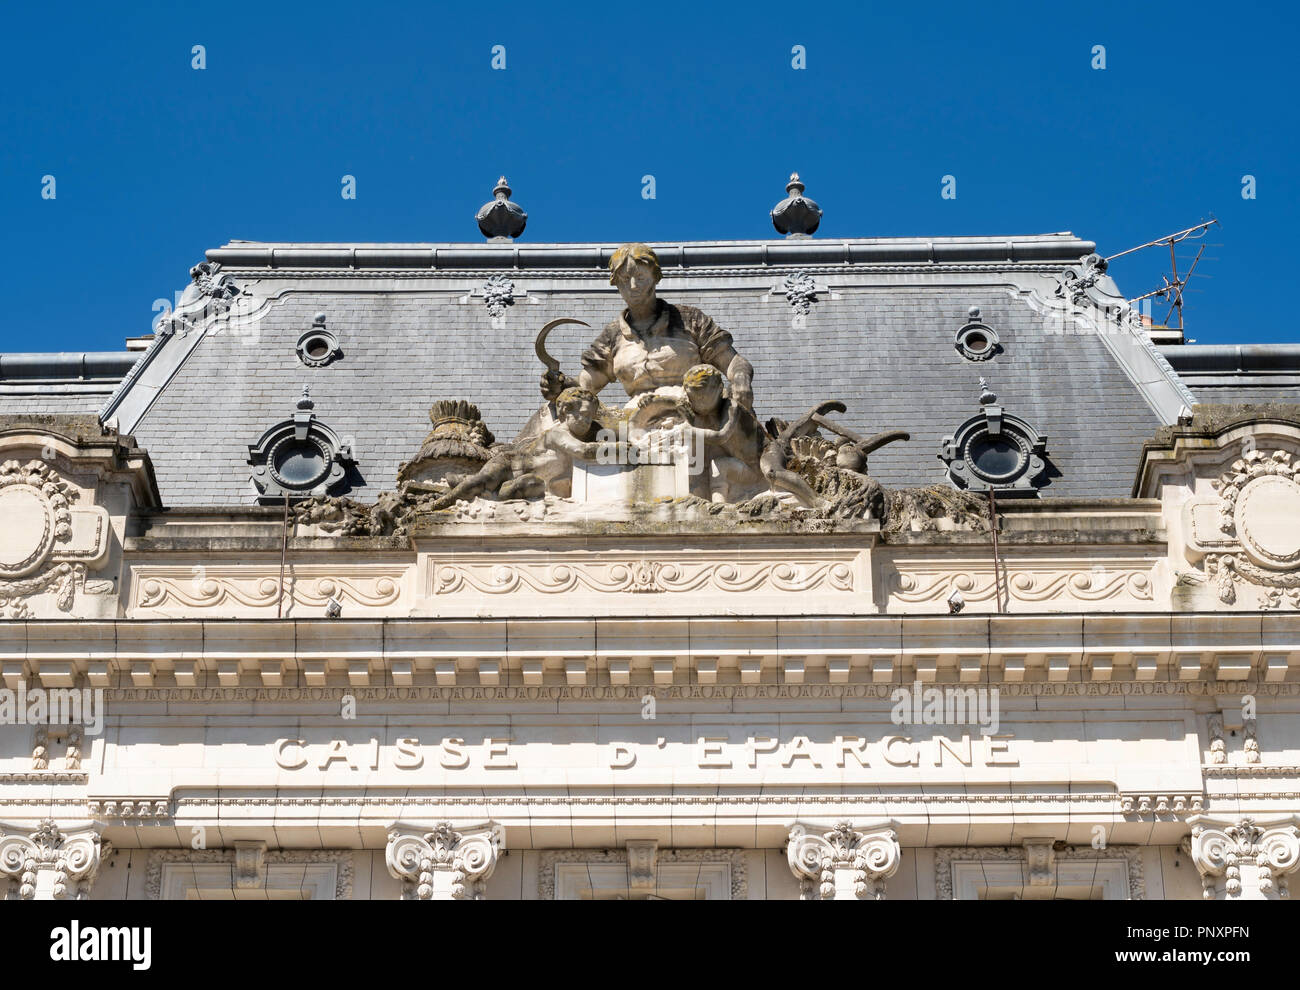 Sculpture of female farmer reaping her crop above the Caisse D'Epargne de Bourgogne building in Auxerre, Burgundy, France, Europe Stock Photo